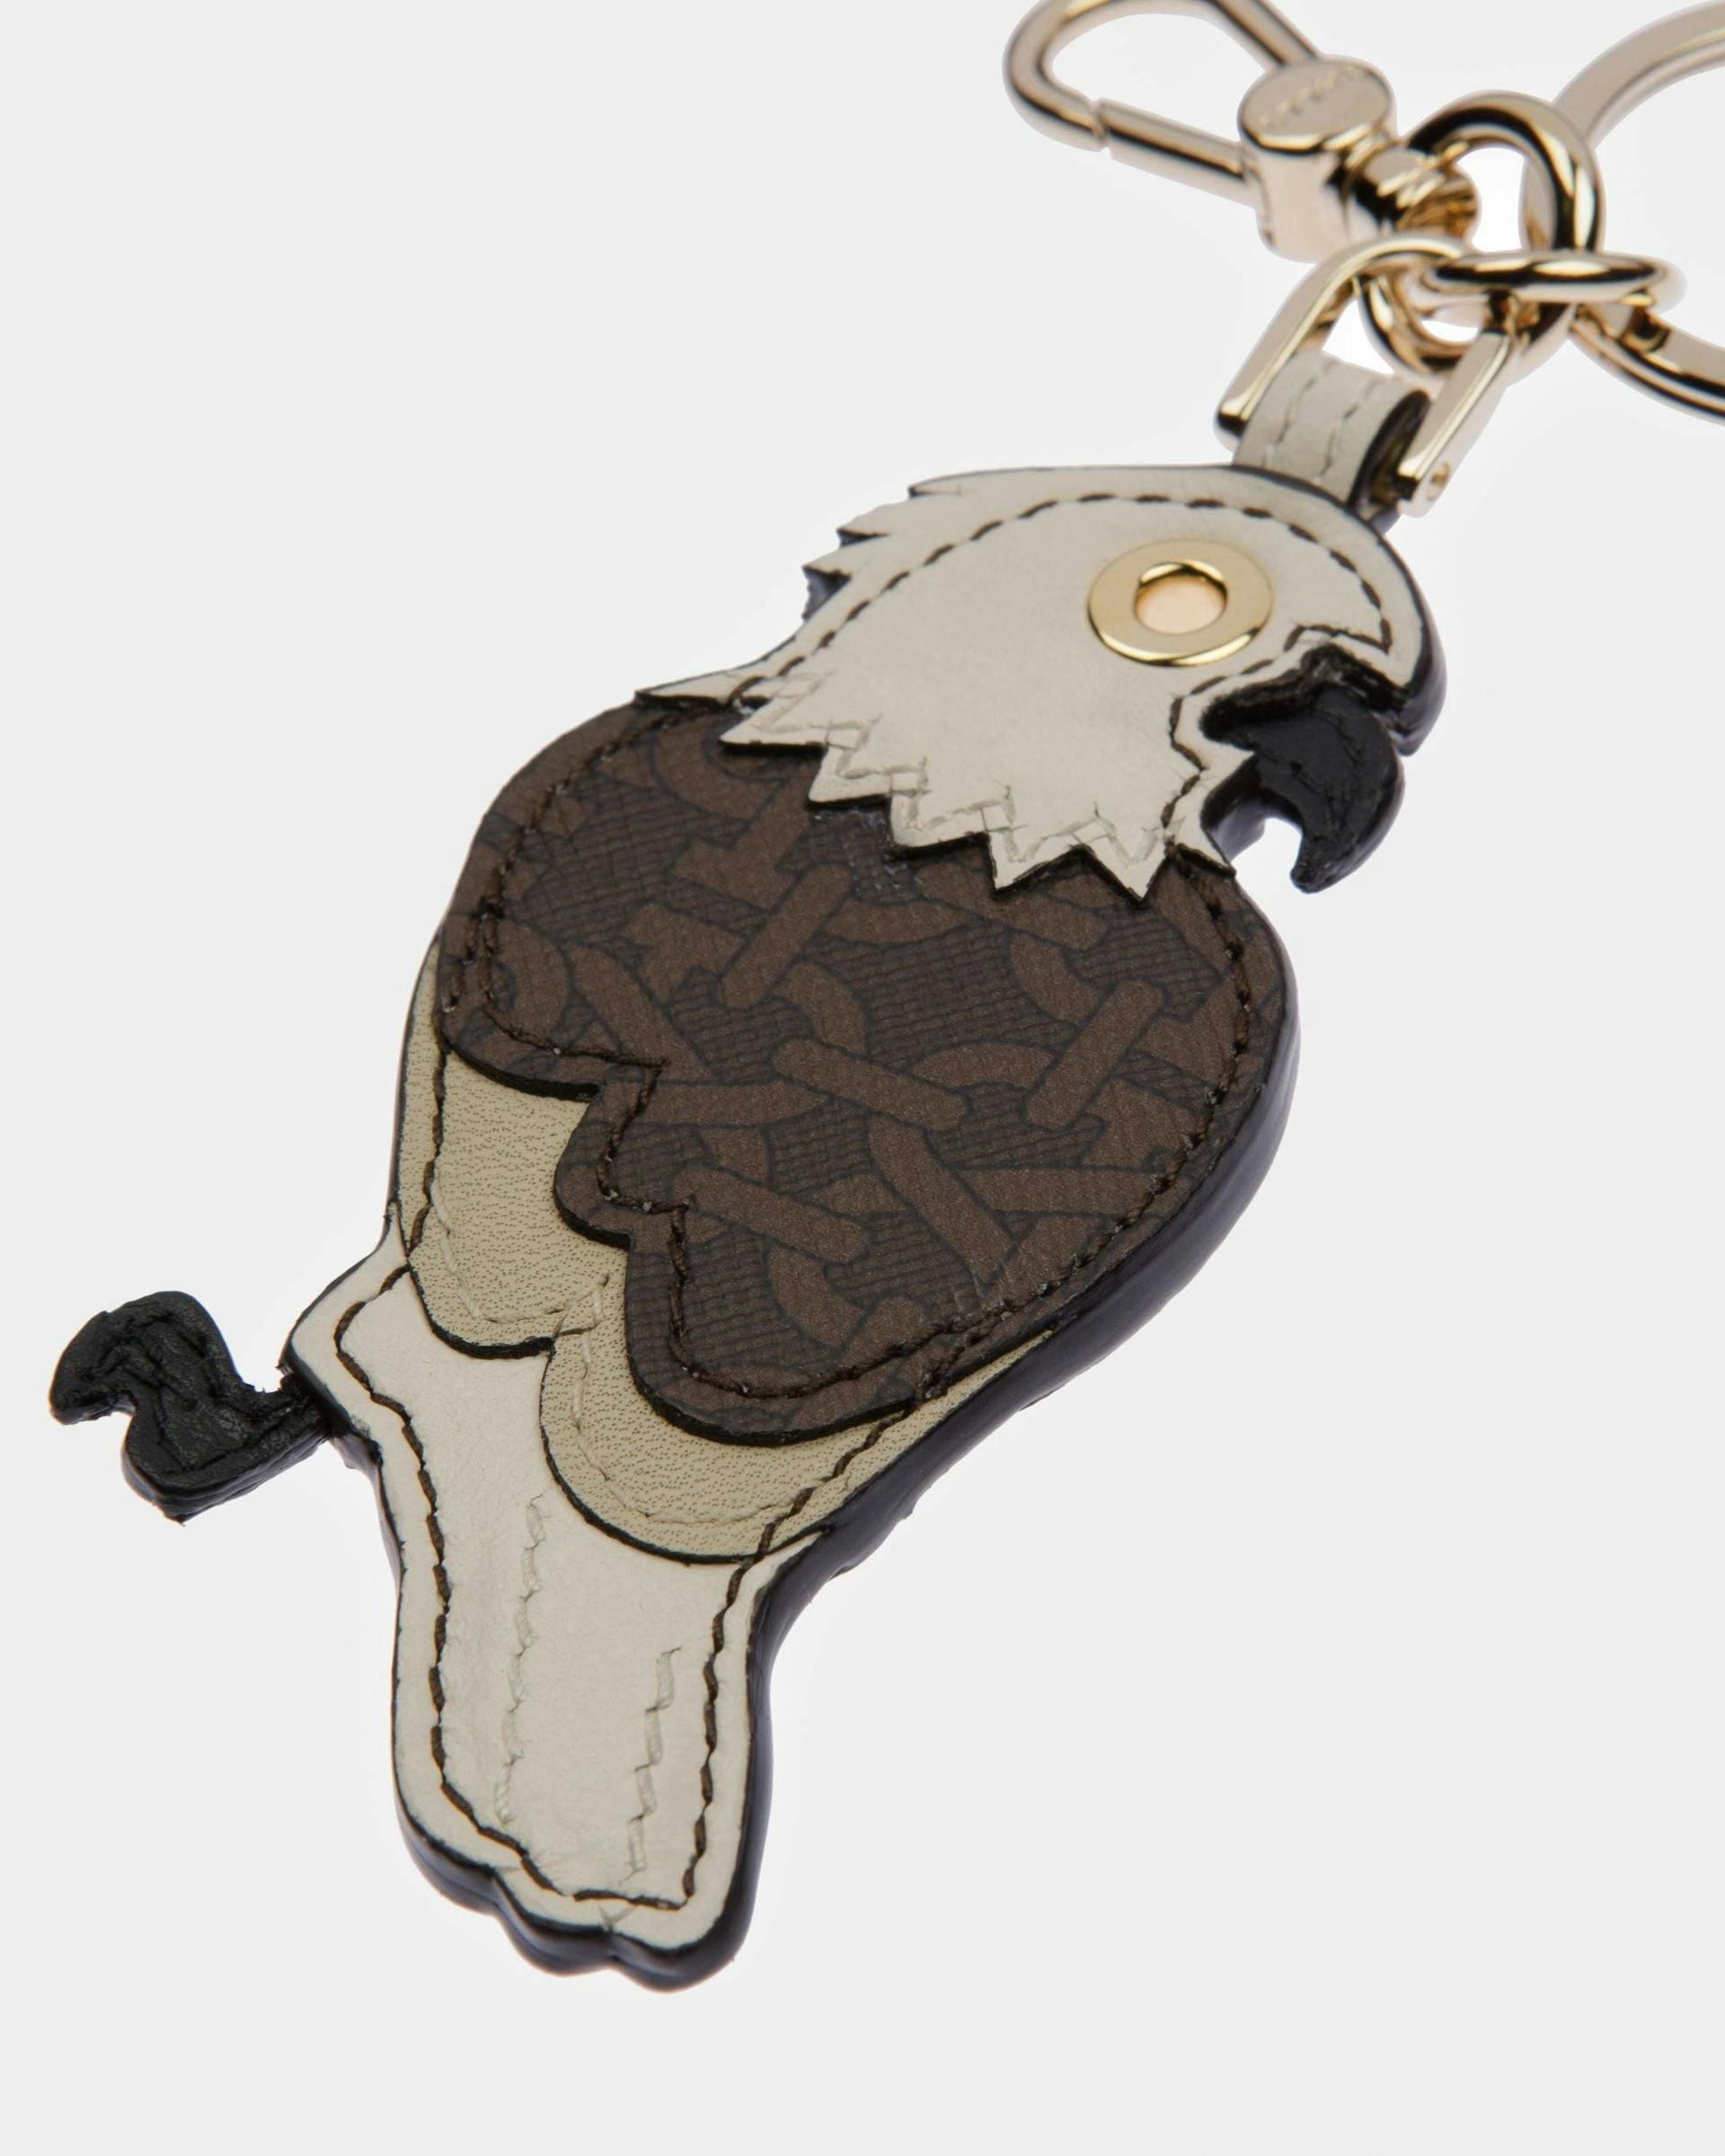 Turye TPU And Leather Key Holder In Brown And Bone - Women's - Bally - 03